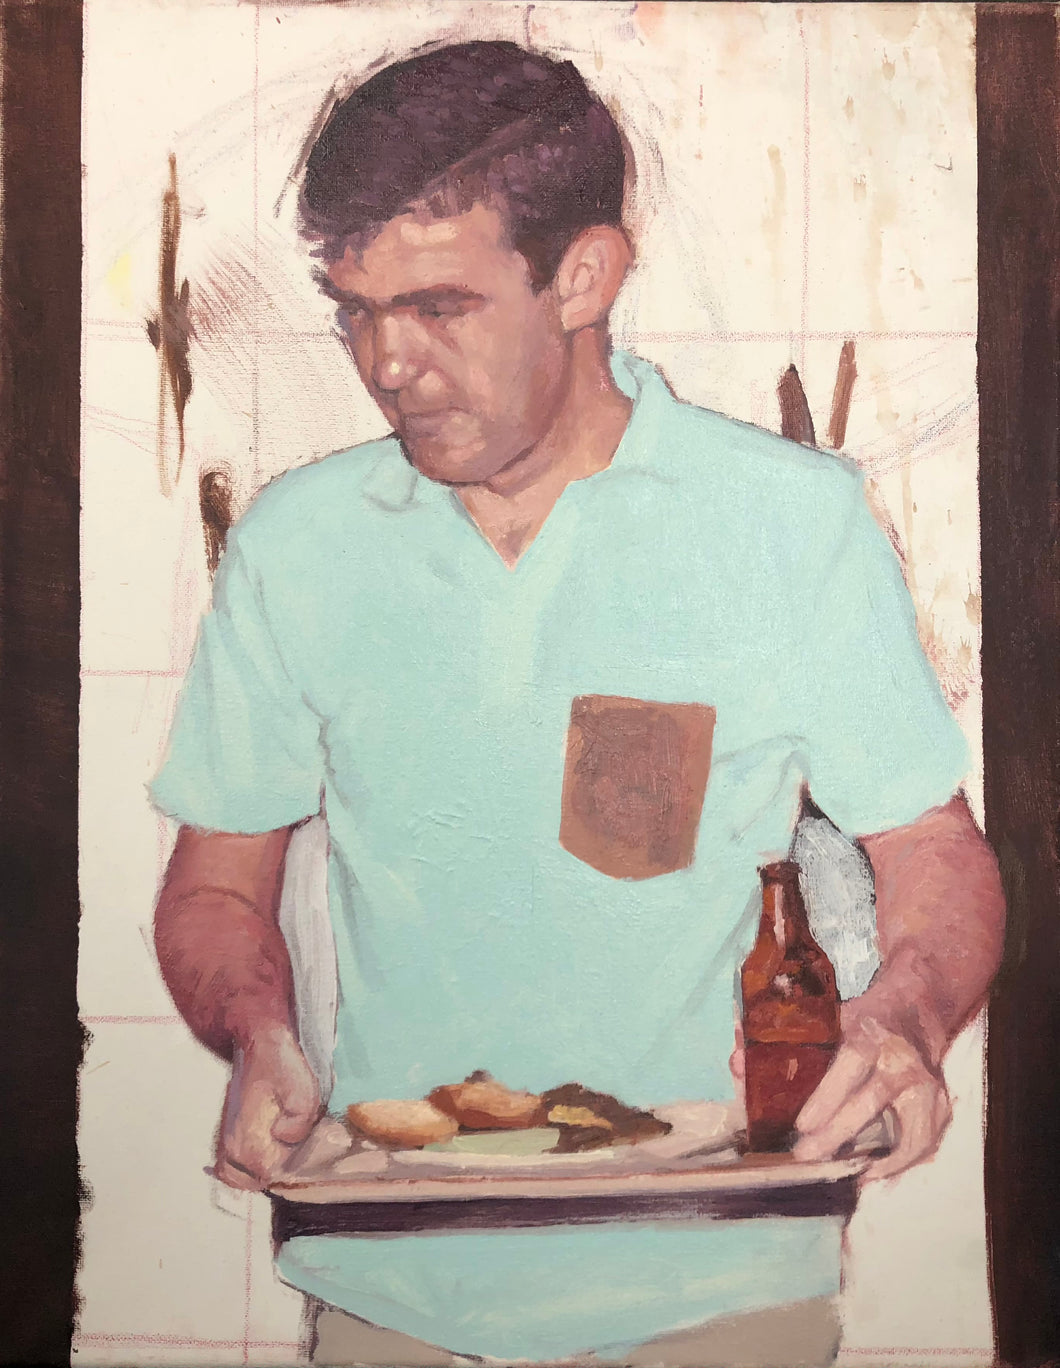 Oil Sketch of a Man With a Food Tray